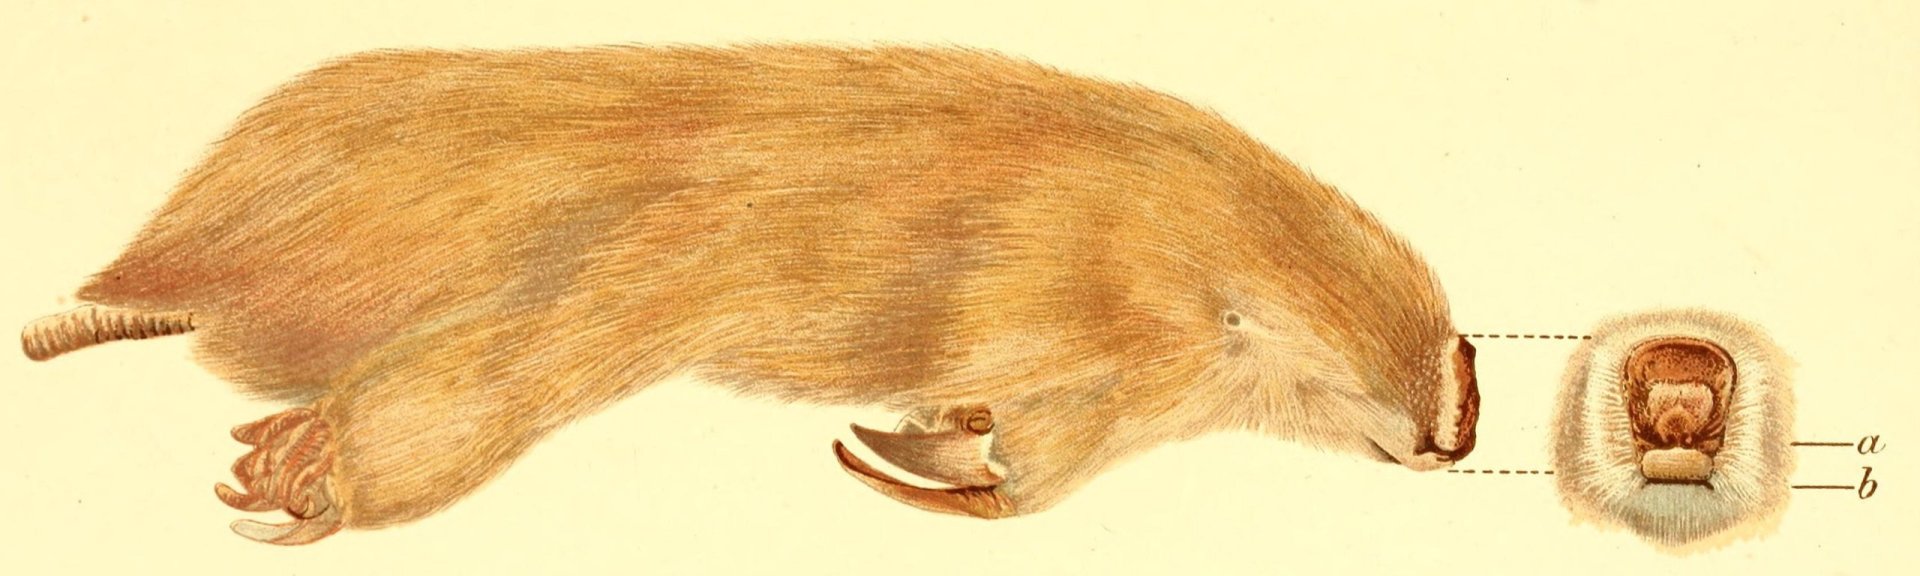 19th-century lithograph of southern marsupial mole. Drawing by Rosa Catherine Fiveash